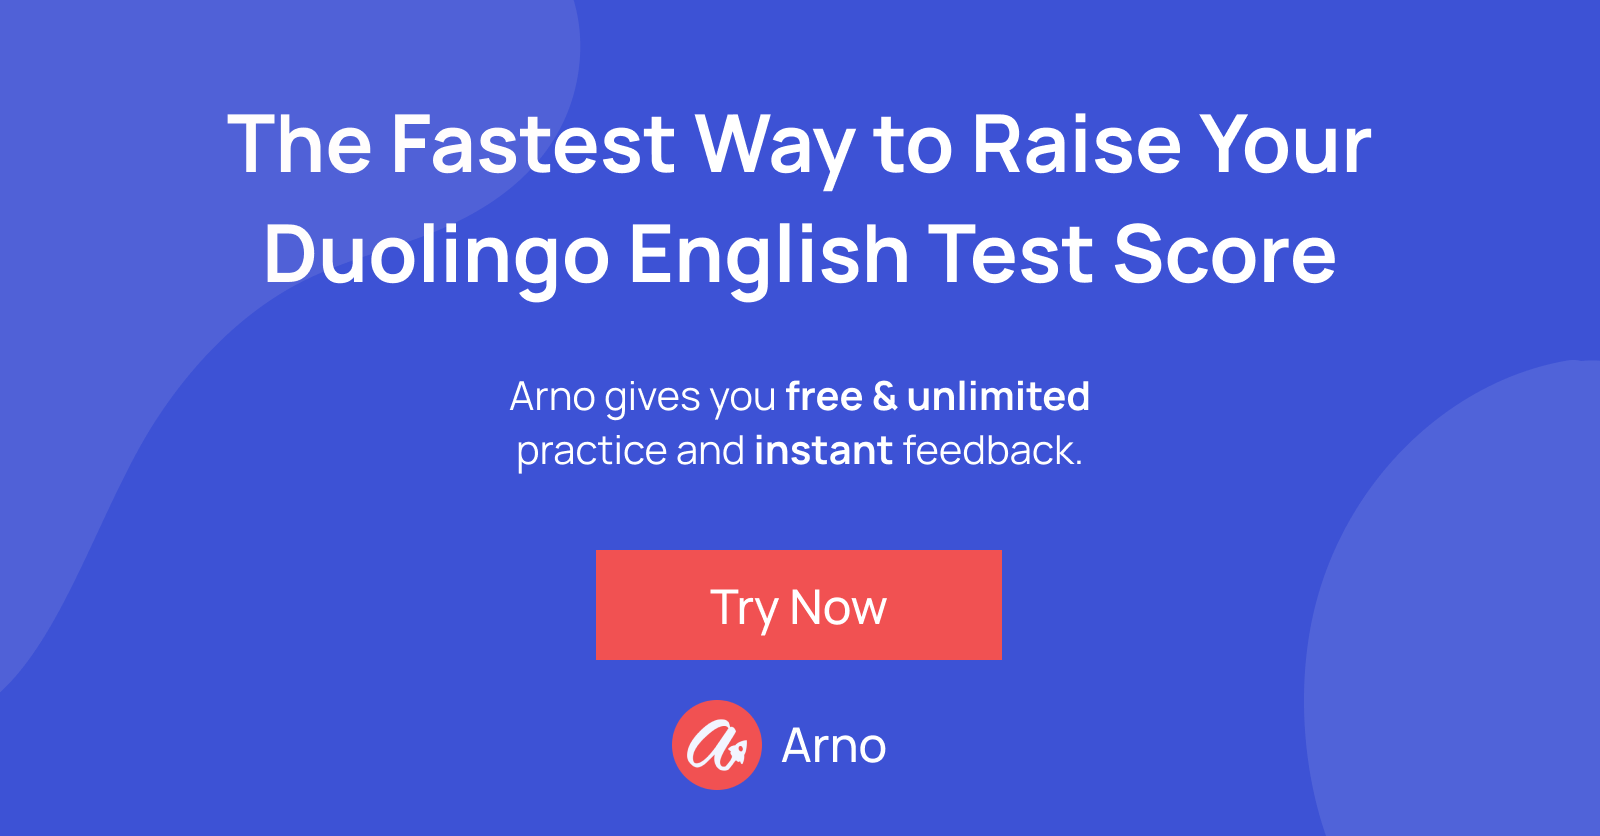 Arno is the fastest way to raise your score on the Duolingo English Test. Click here to create your free account.